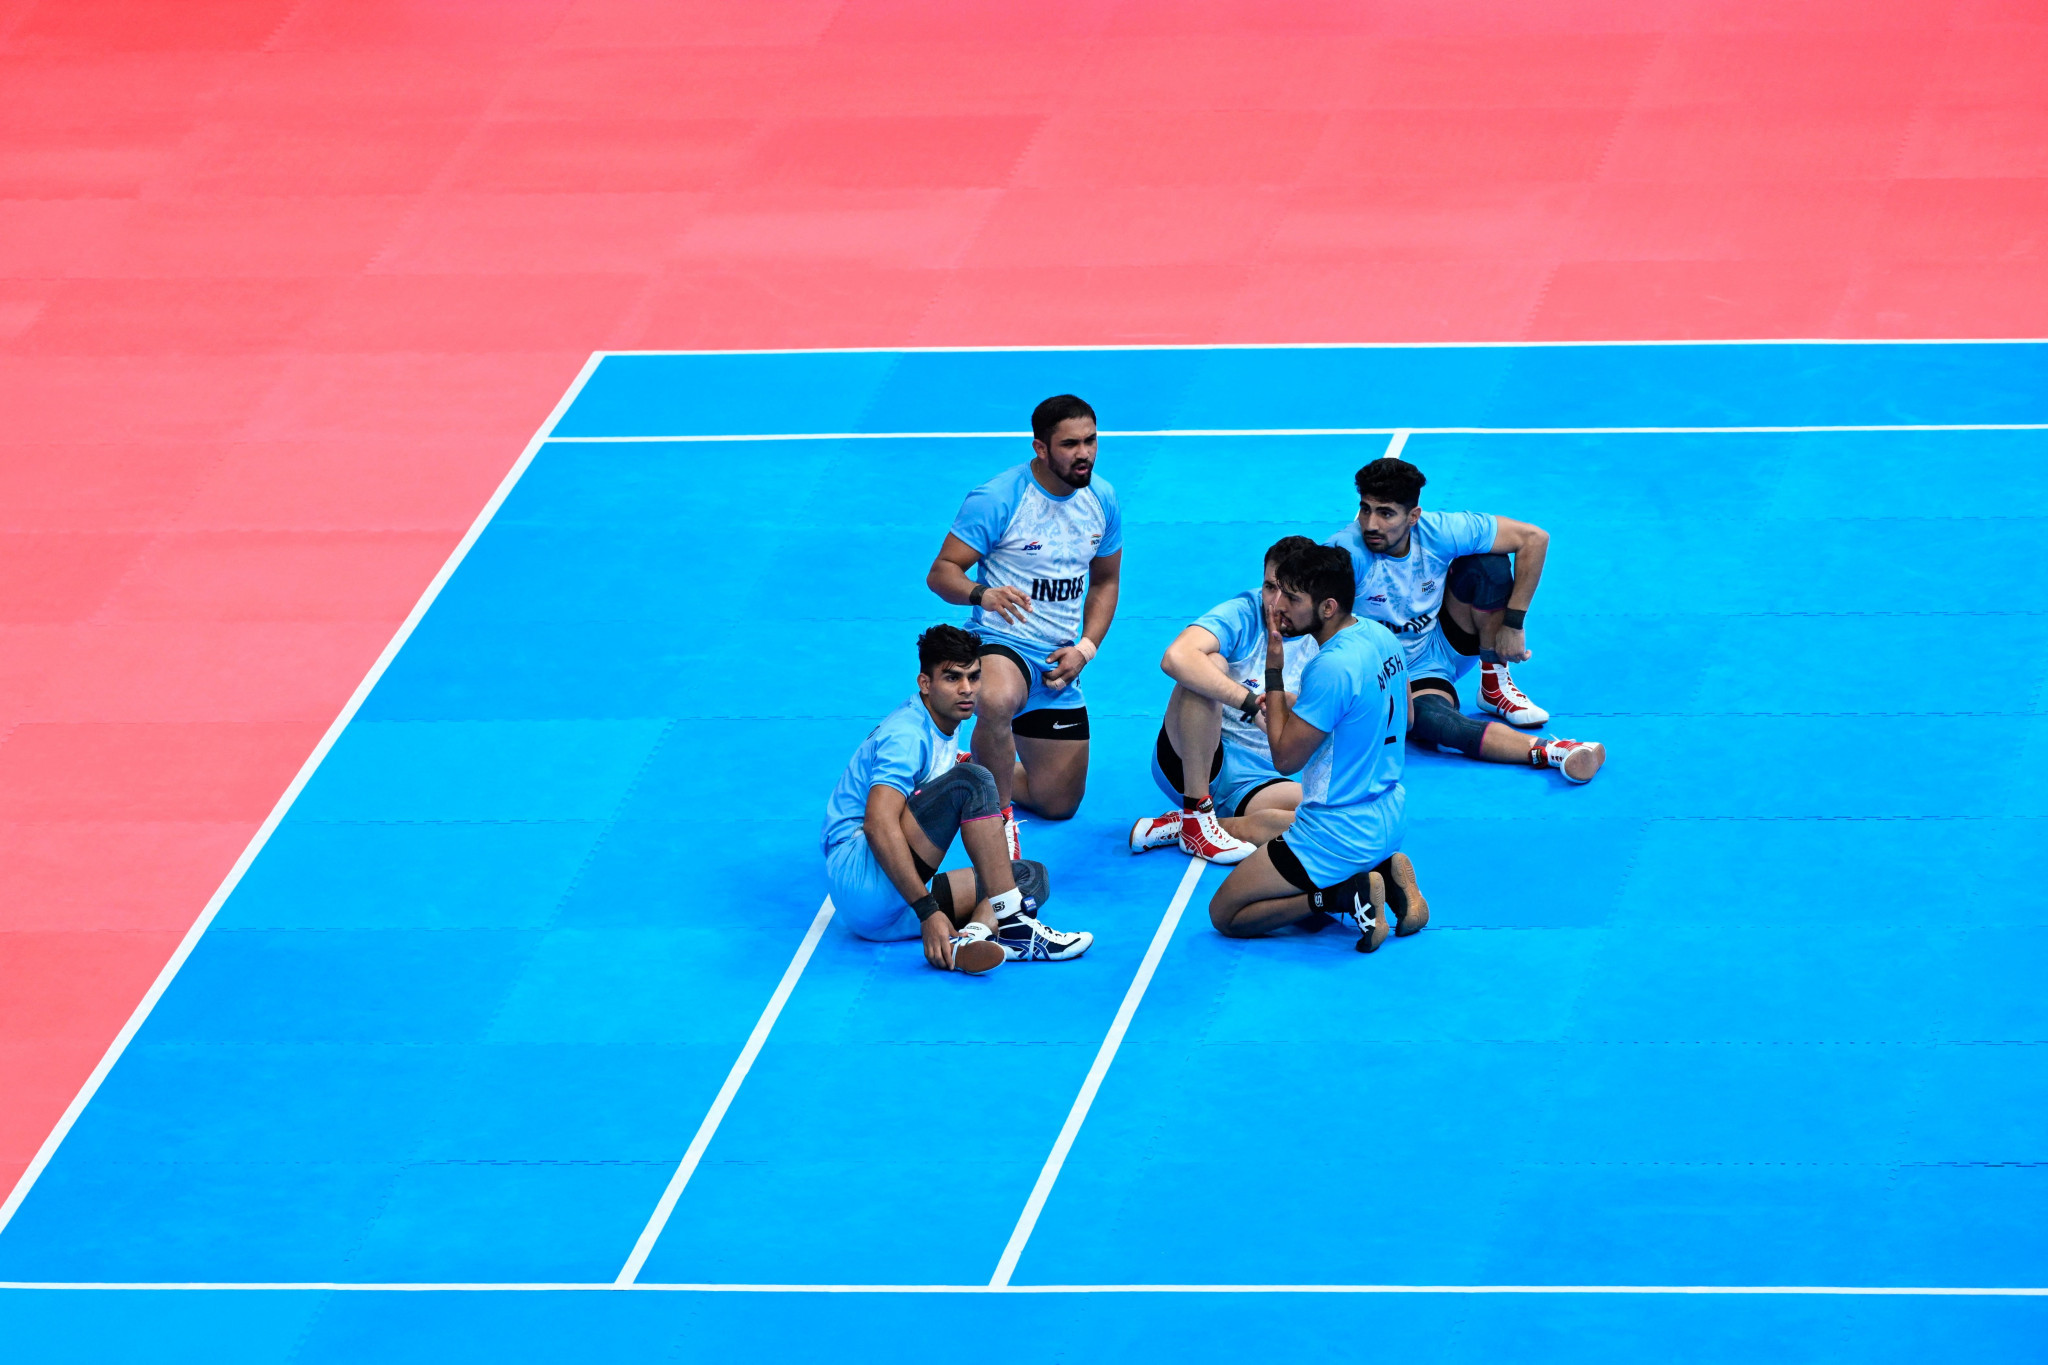 The men's kabaddi final was suspended for more than an hour after athletes from both sides refused to play due to a disputed decision from the referee ©Getty Images